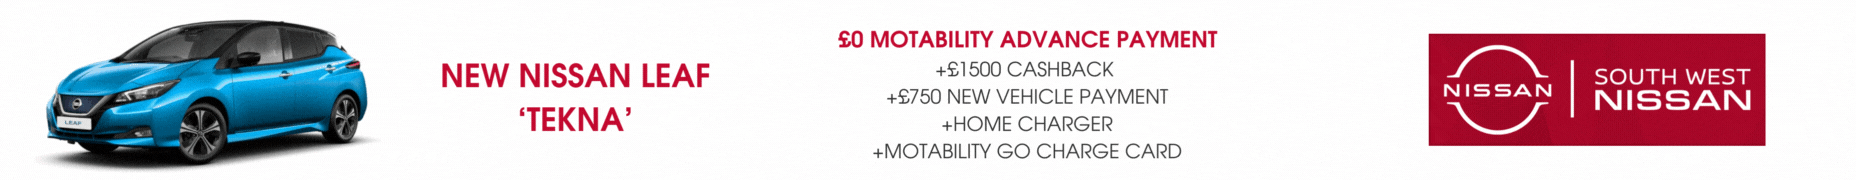 02 Q1 New - Motability Offers South West Nissan